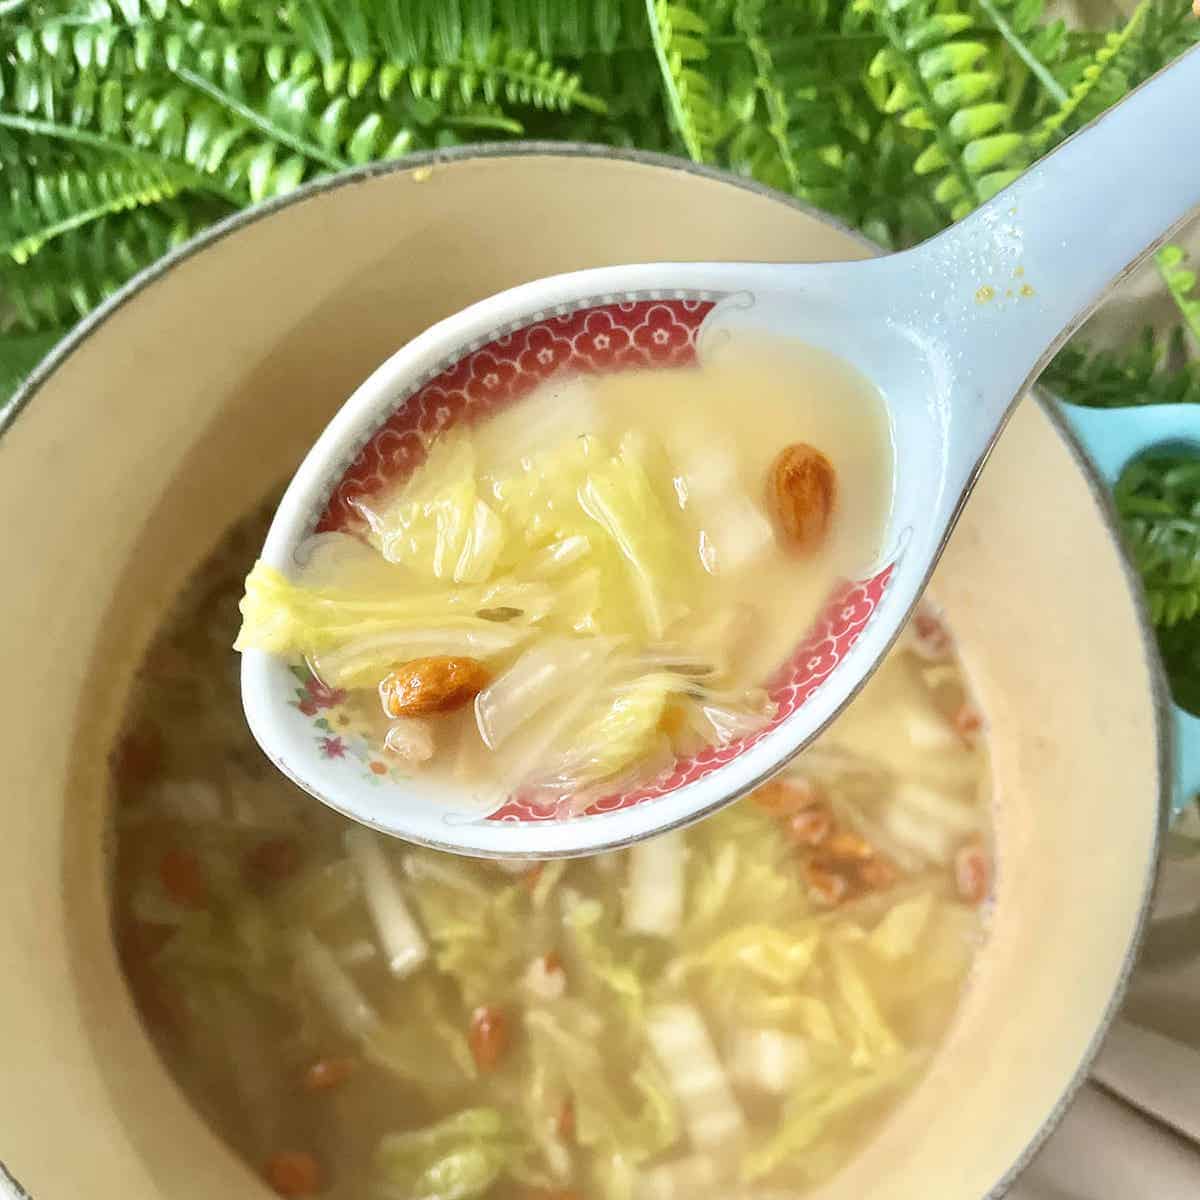 Scooping up some homemade Chinese Cabbage Soup with wolfberries.